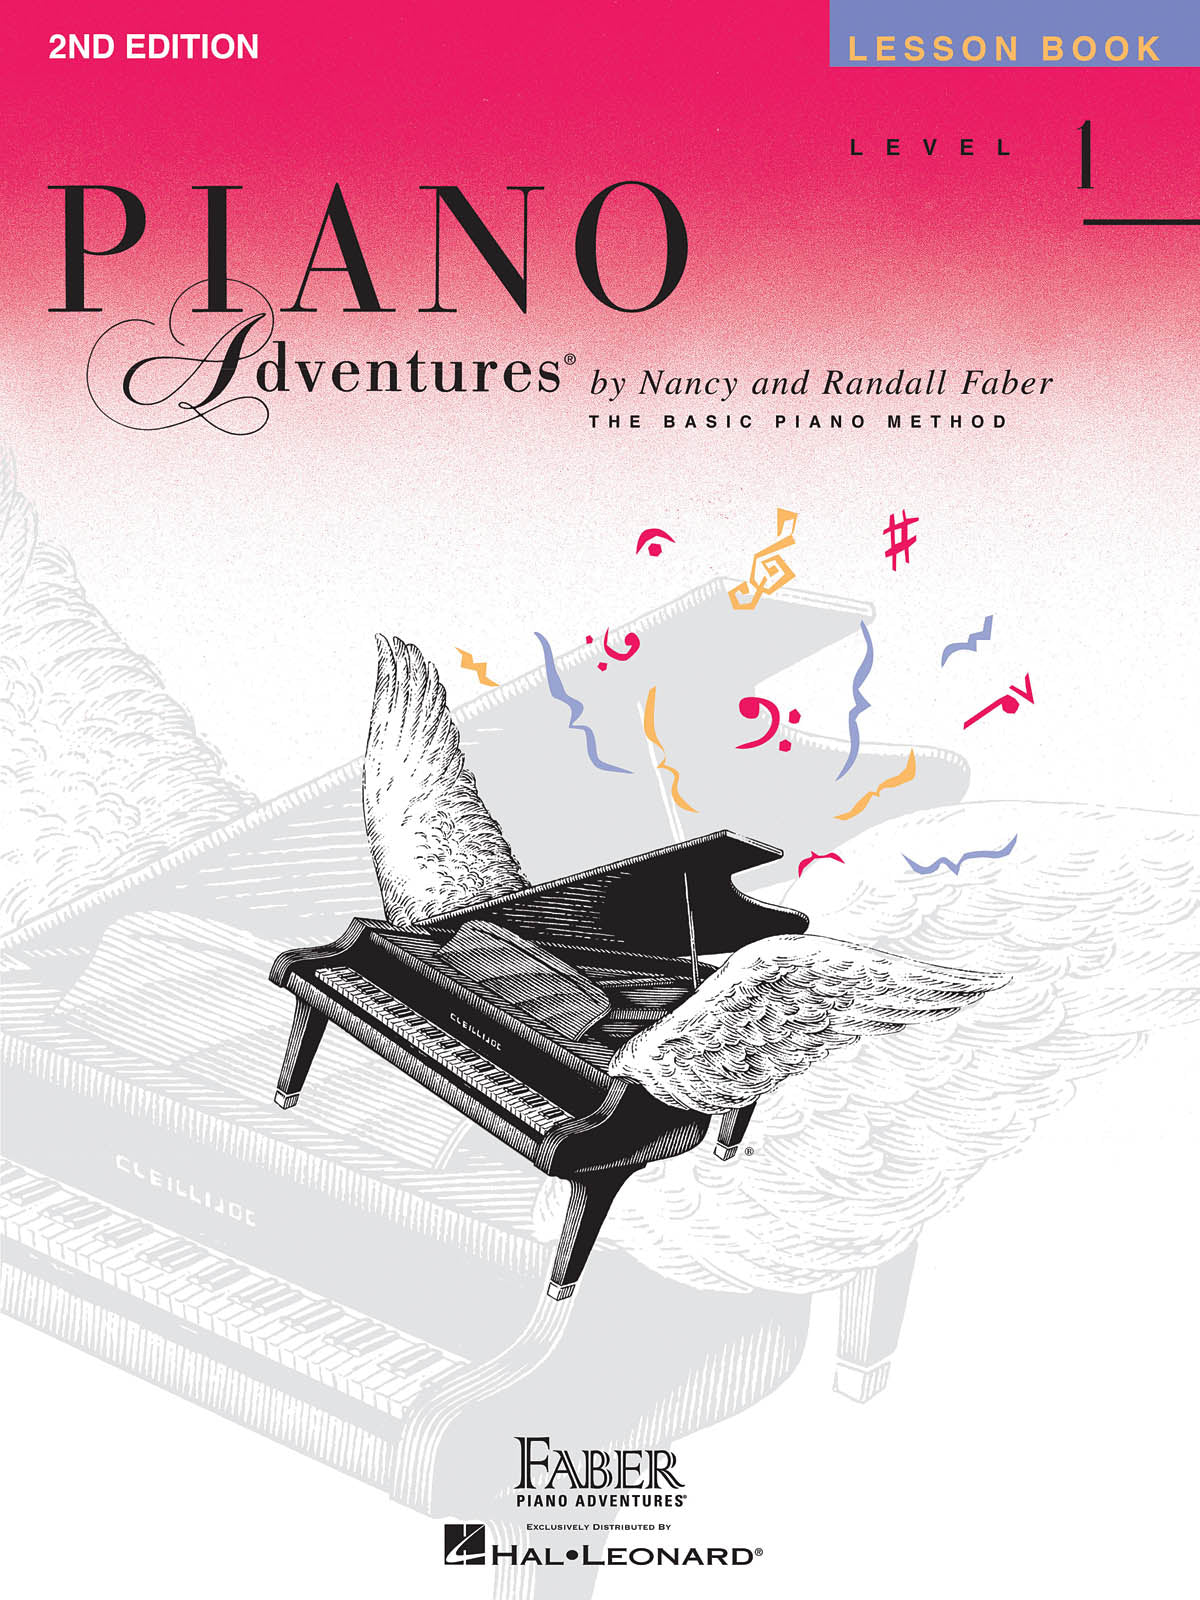 Piano Adventures: Lesson Book - Level 1 by Nancy Faber, Randall Faber